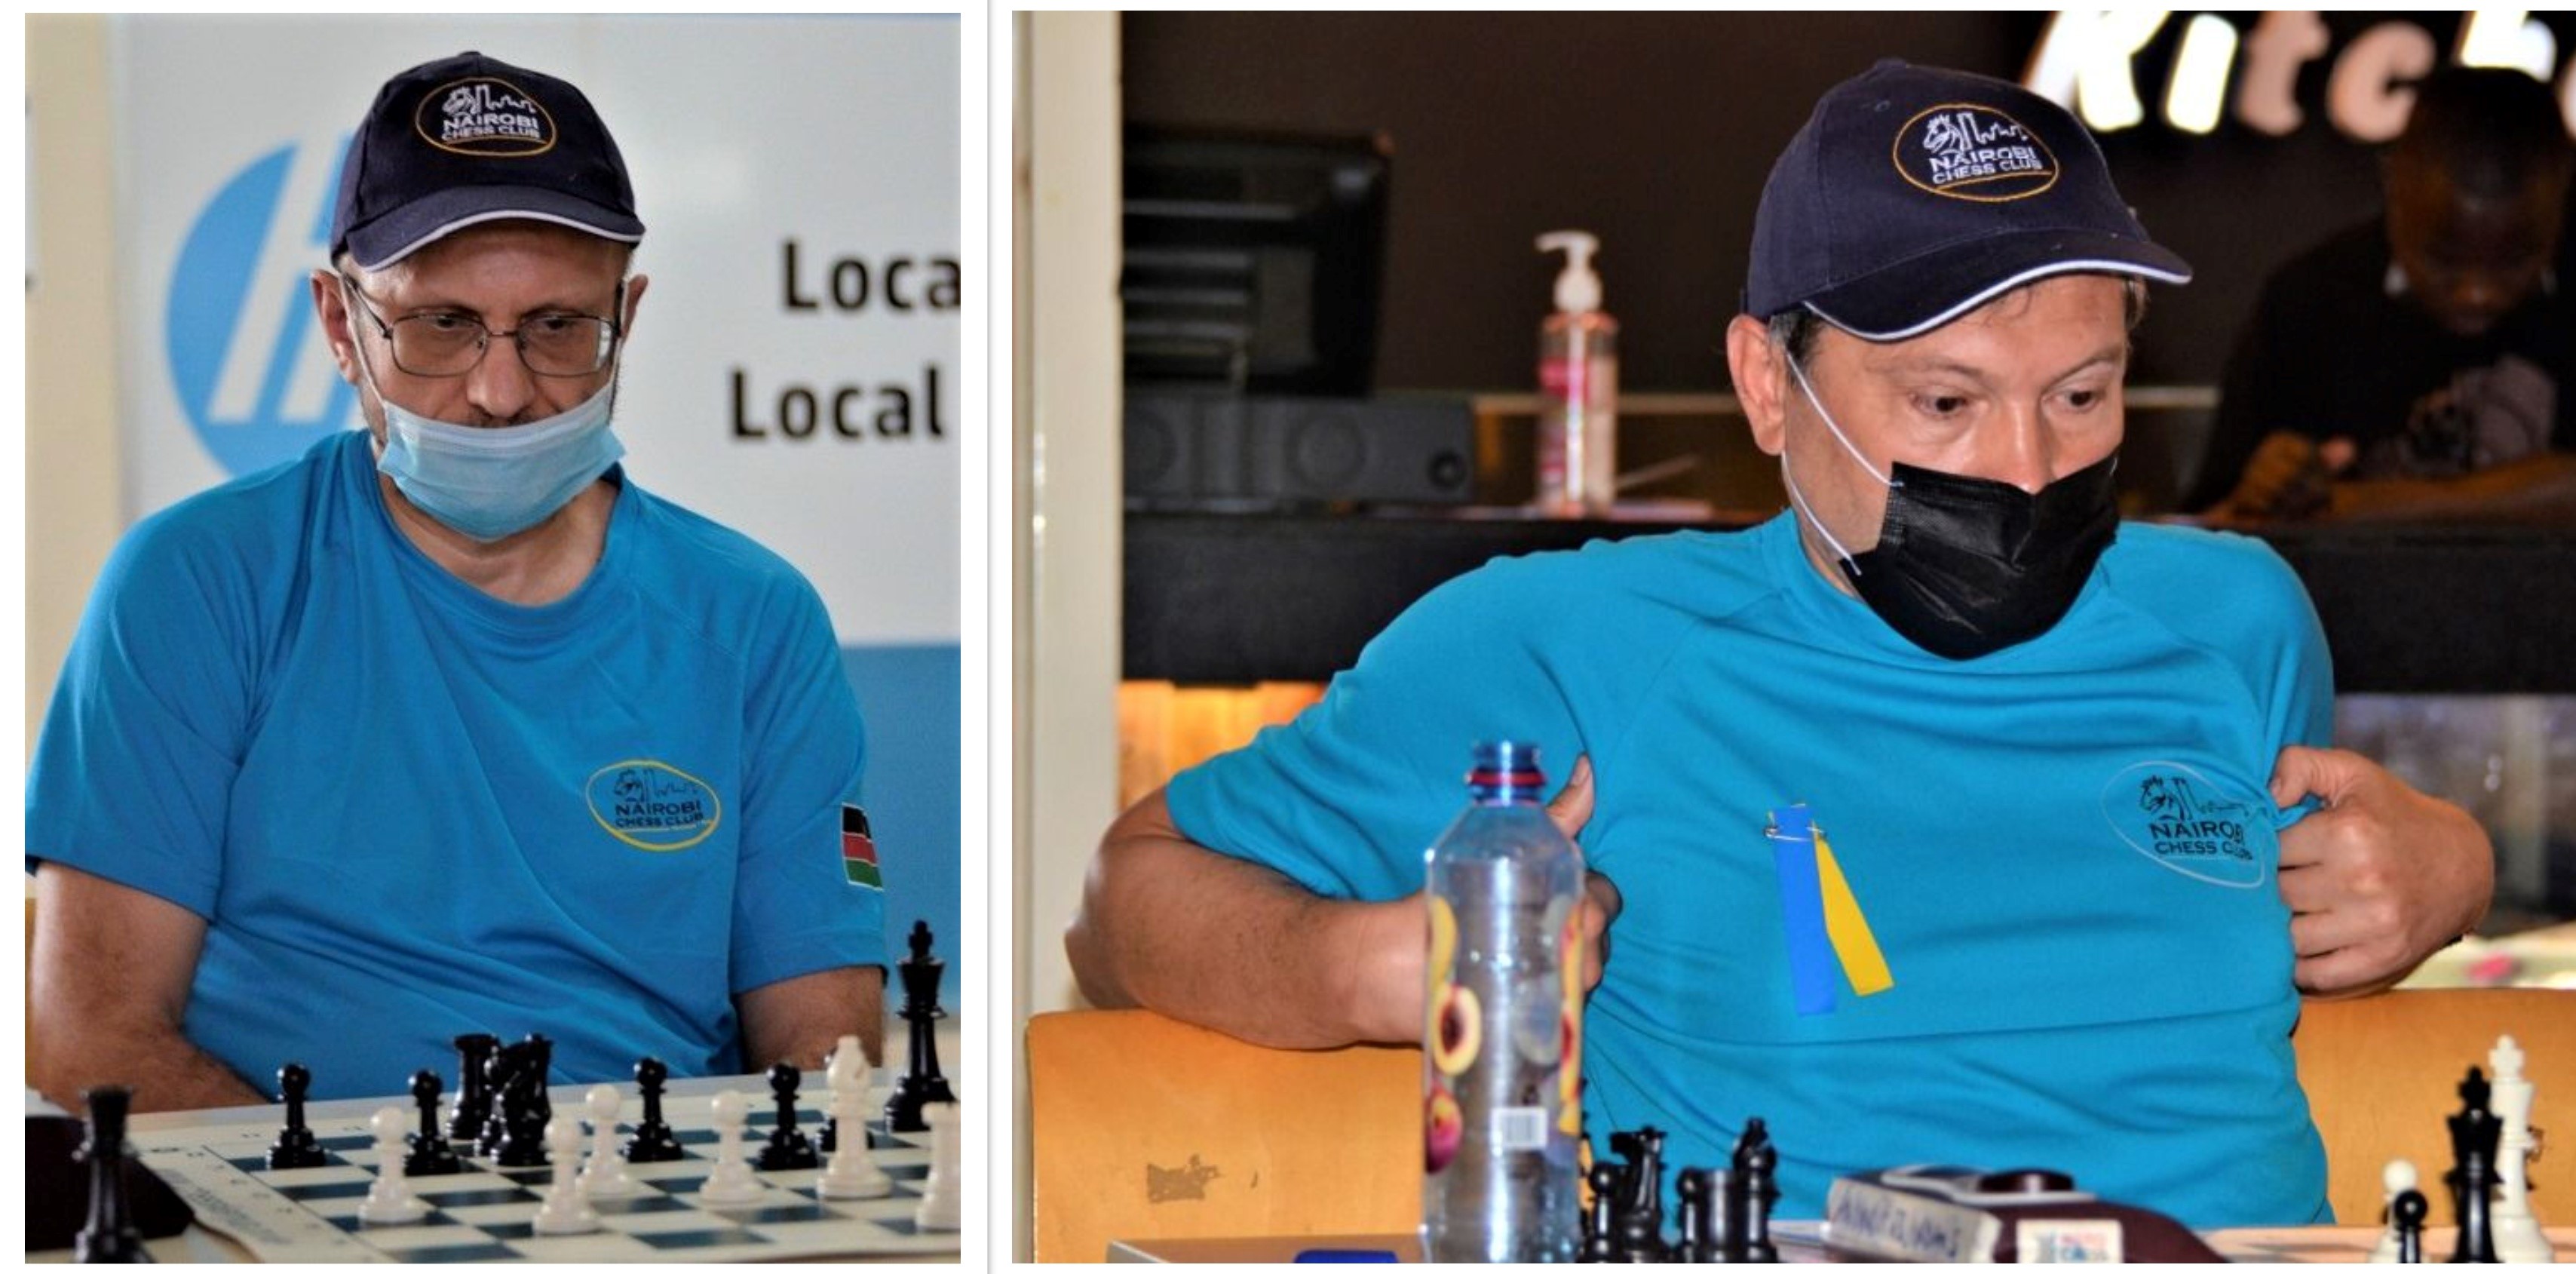 Nairobi Chess Club players from left Viacheslav from Russia and Benjamin (Veniamin) Negru of Romania clearly showing which side he supports in the Russia - Ukraine conflict!